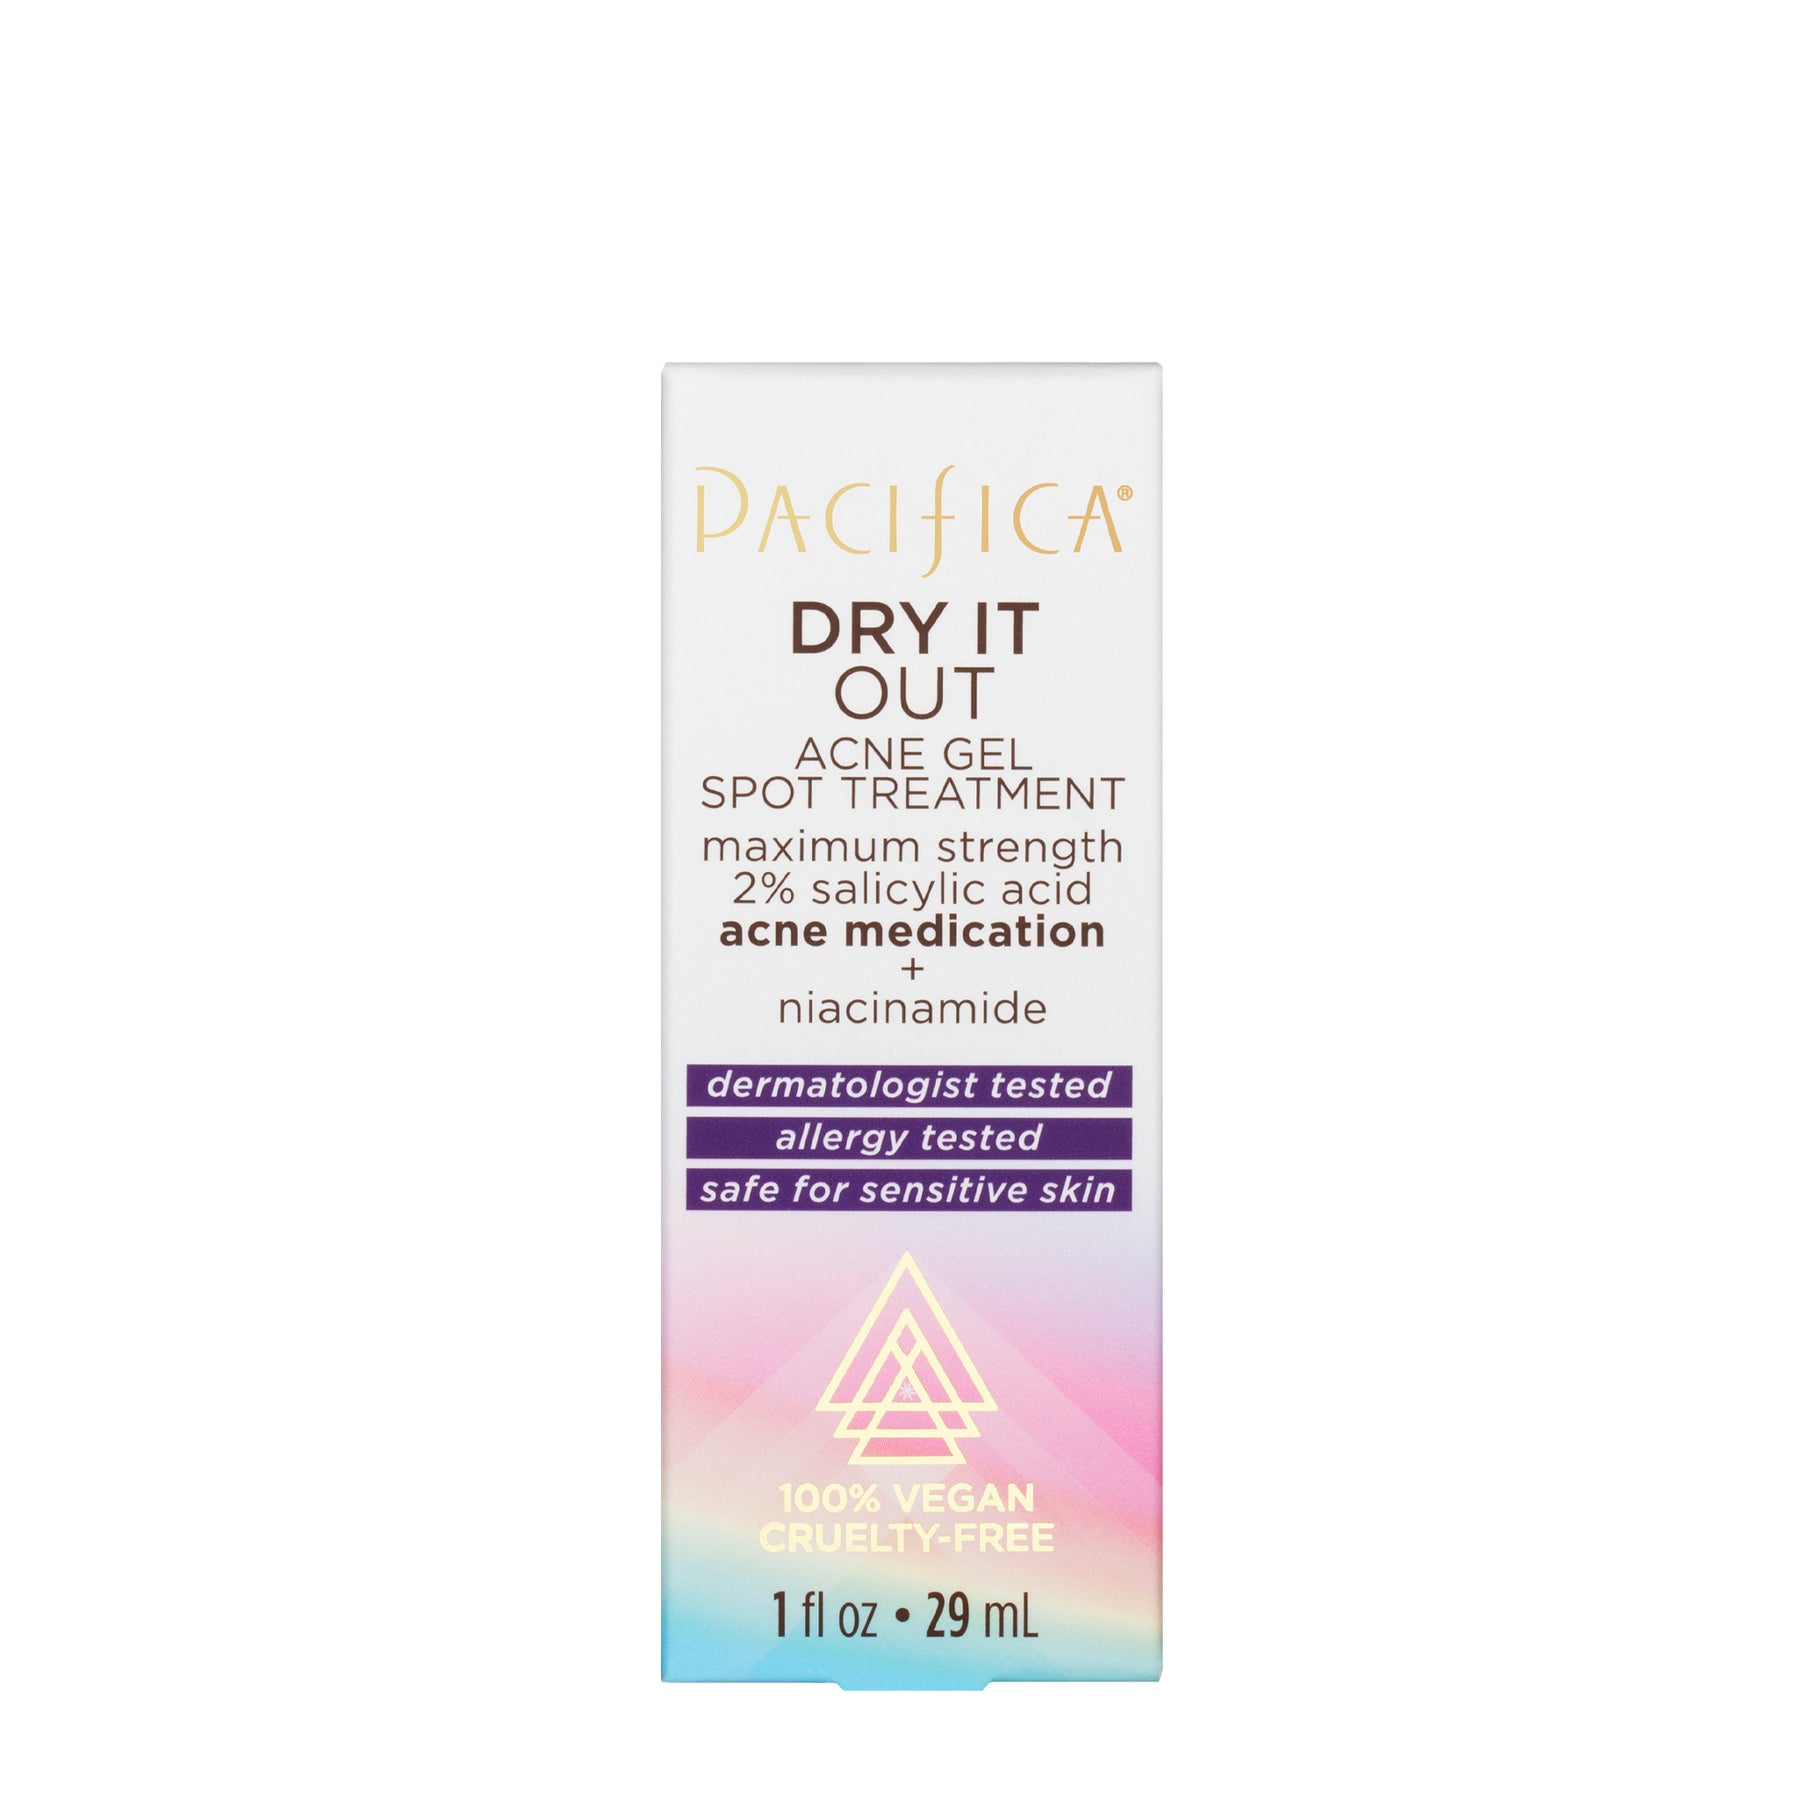 Dry It Out Acne Gel Spot Treatment - Skin Care - Pacifica Beauty